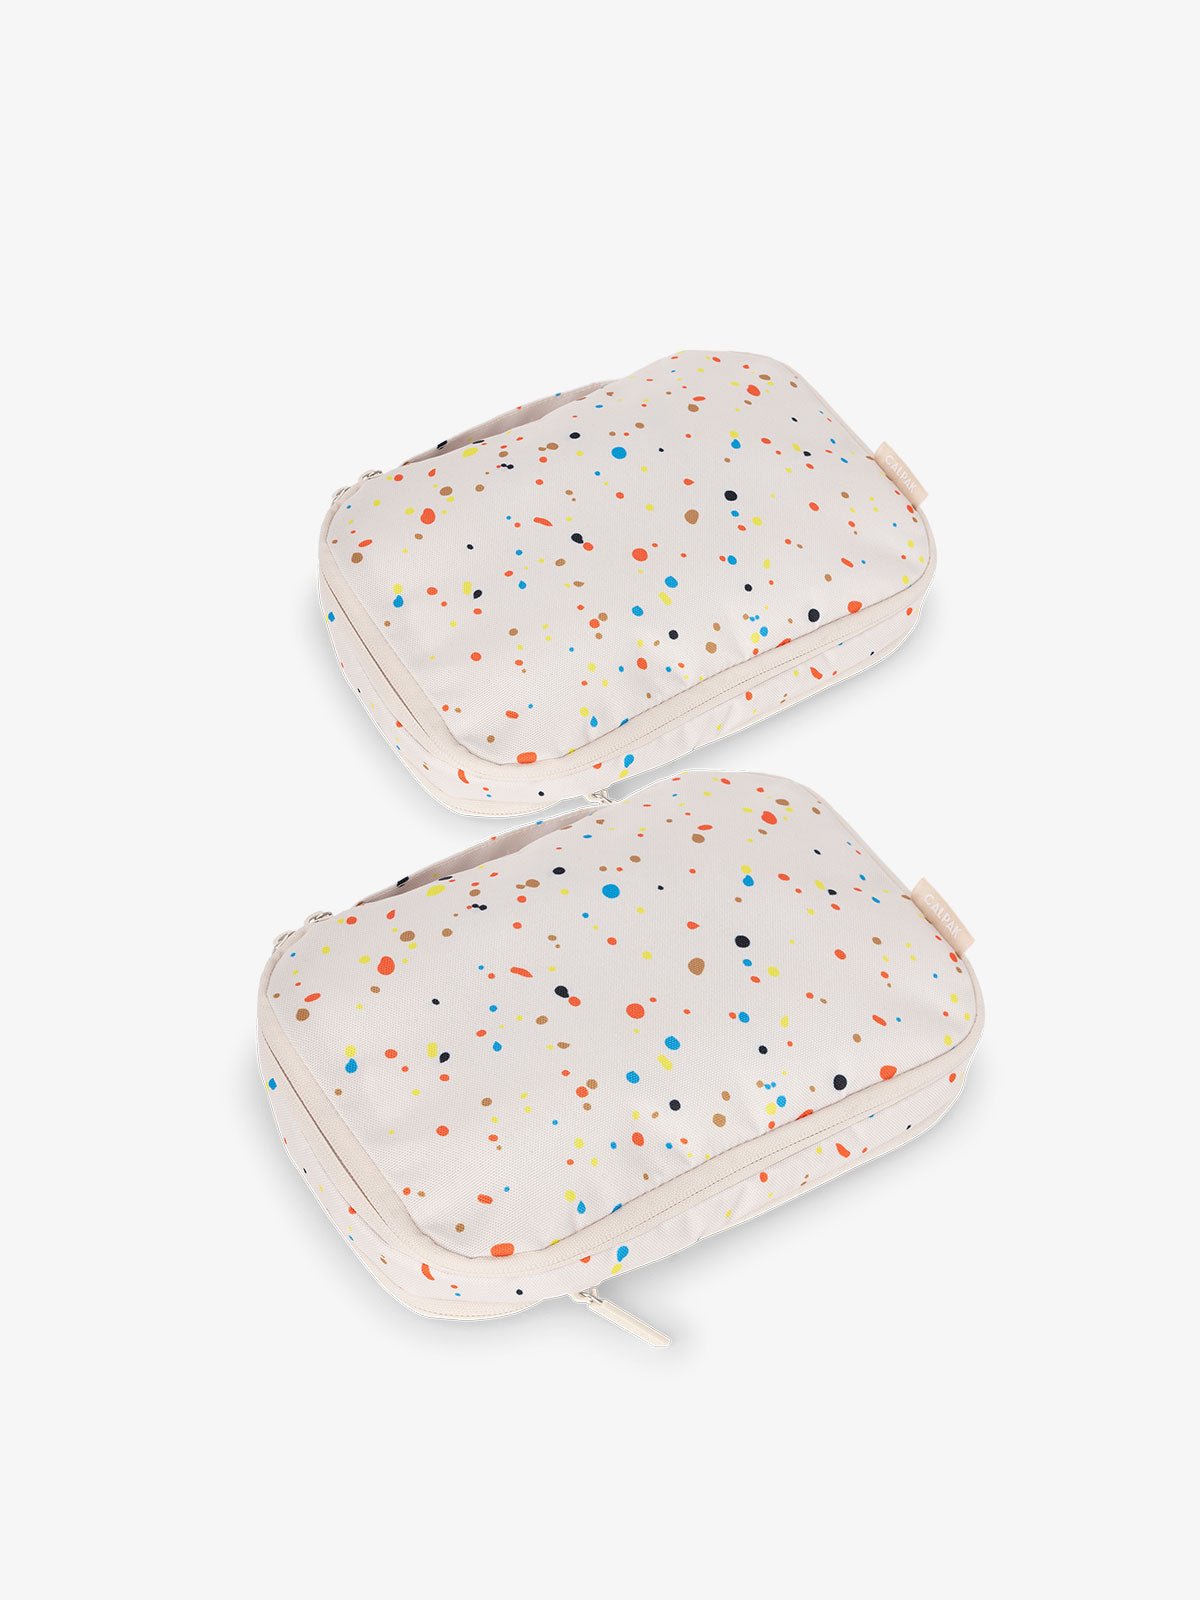 CALPAK small compression packing cubes in beige and multi-colored speckle